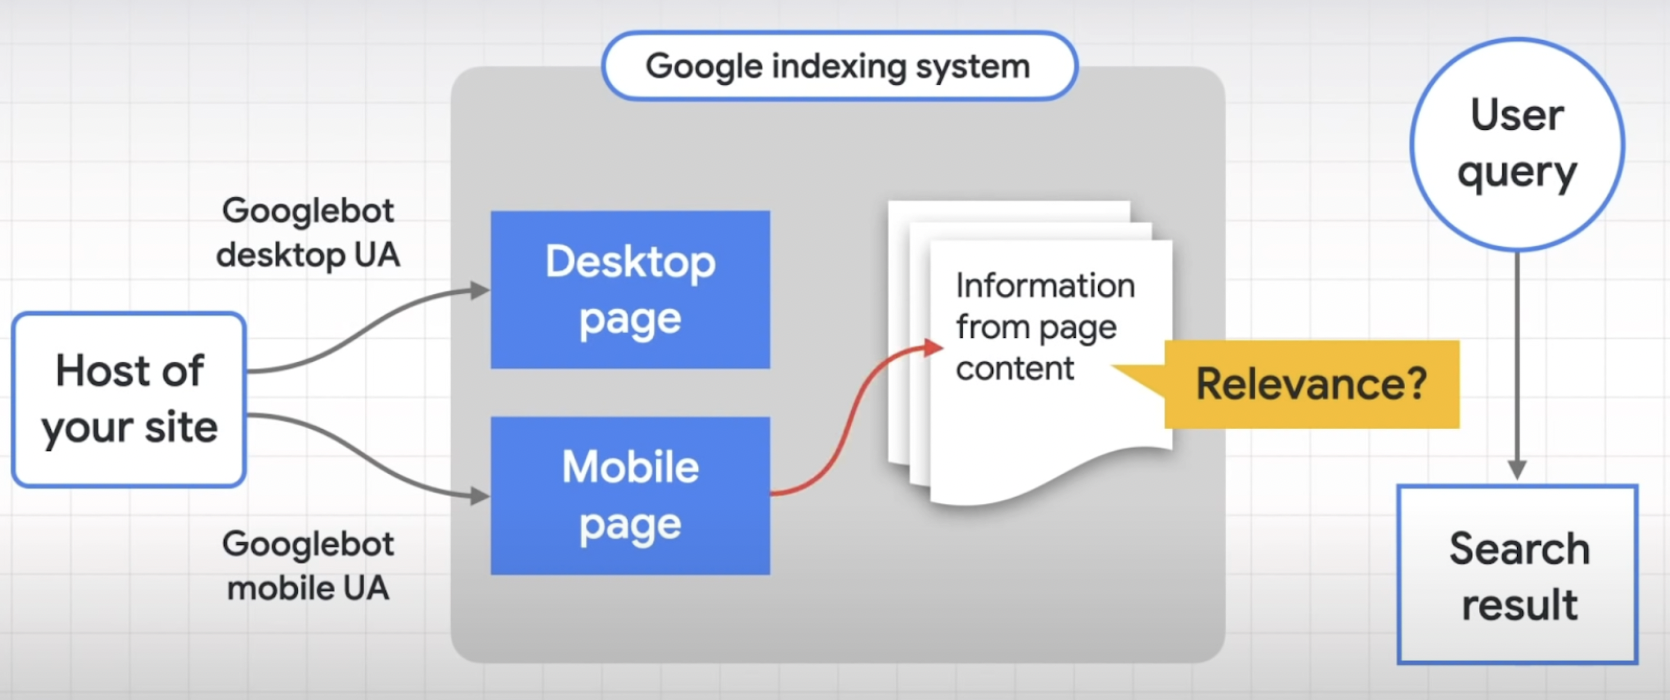 Illustration of how Google Indexing System works.